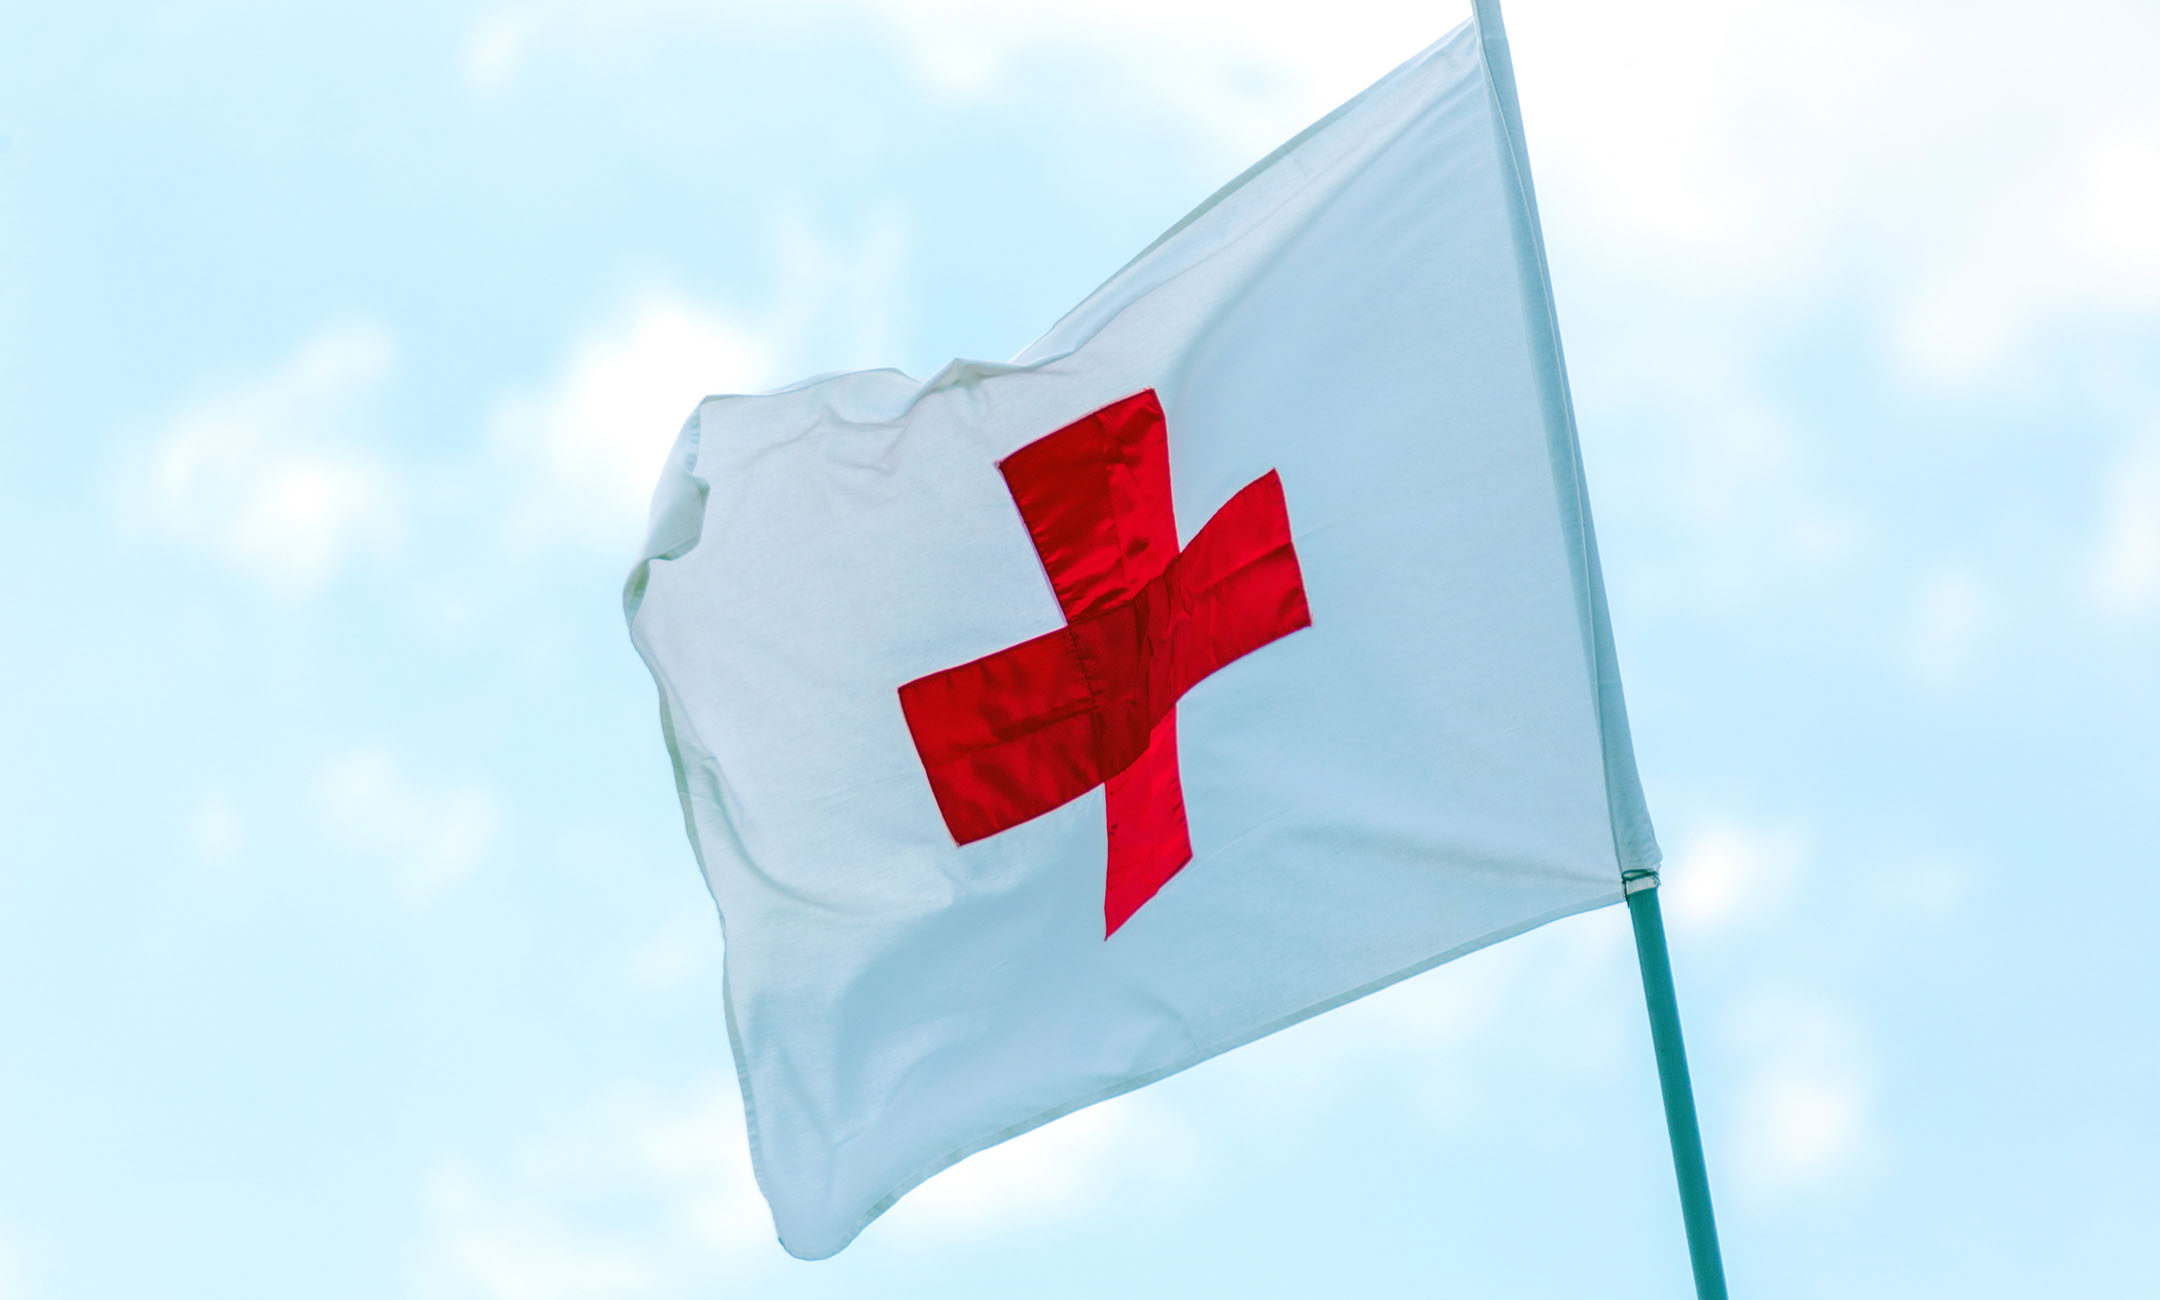 Red Cross flag waving in the wind.